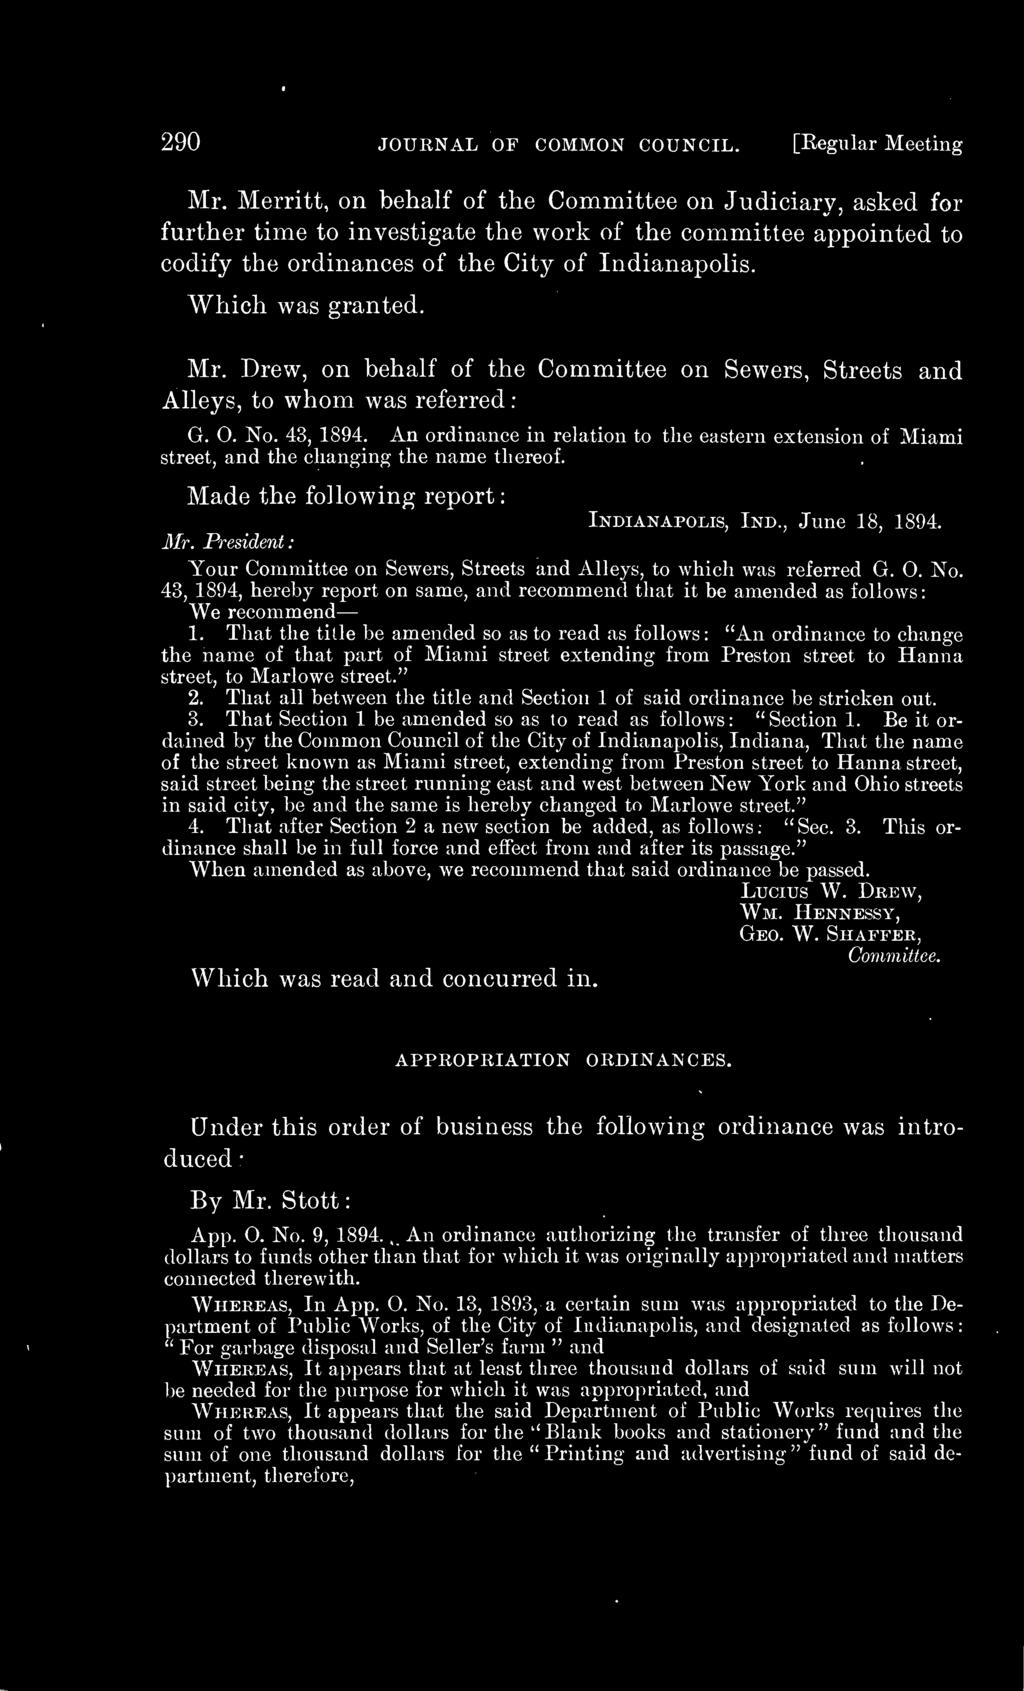 Drew, on behalf of the Committee on Sewers, Streets and Alleys, to whom was referred G. O. No. 43, 1894.